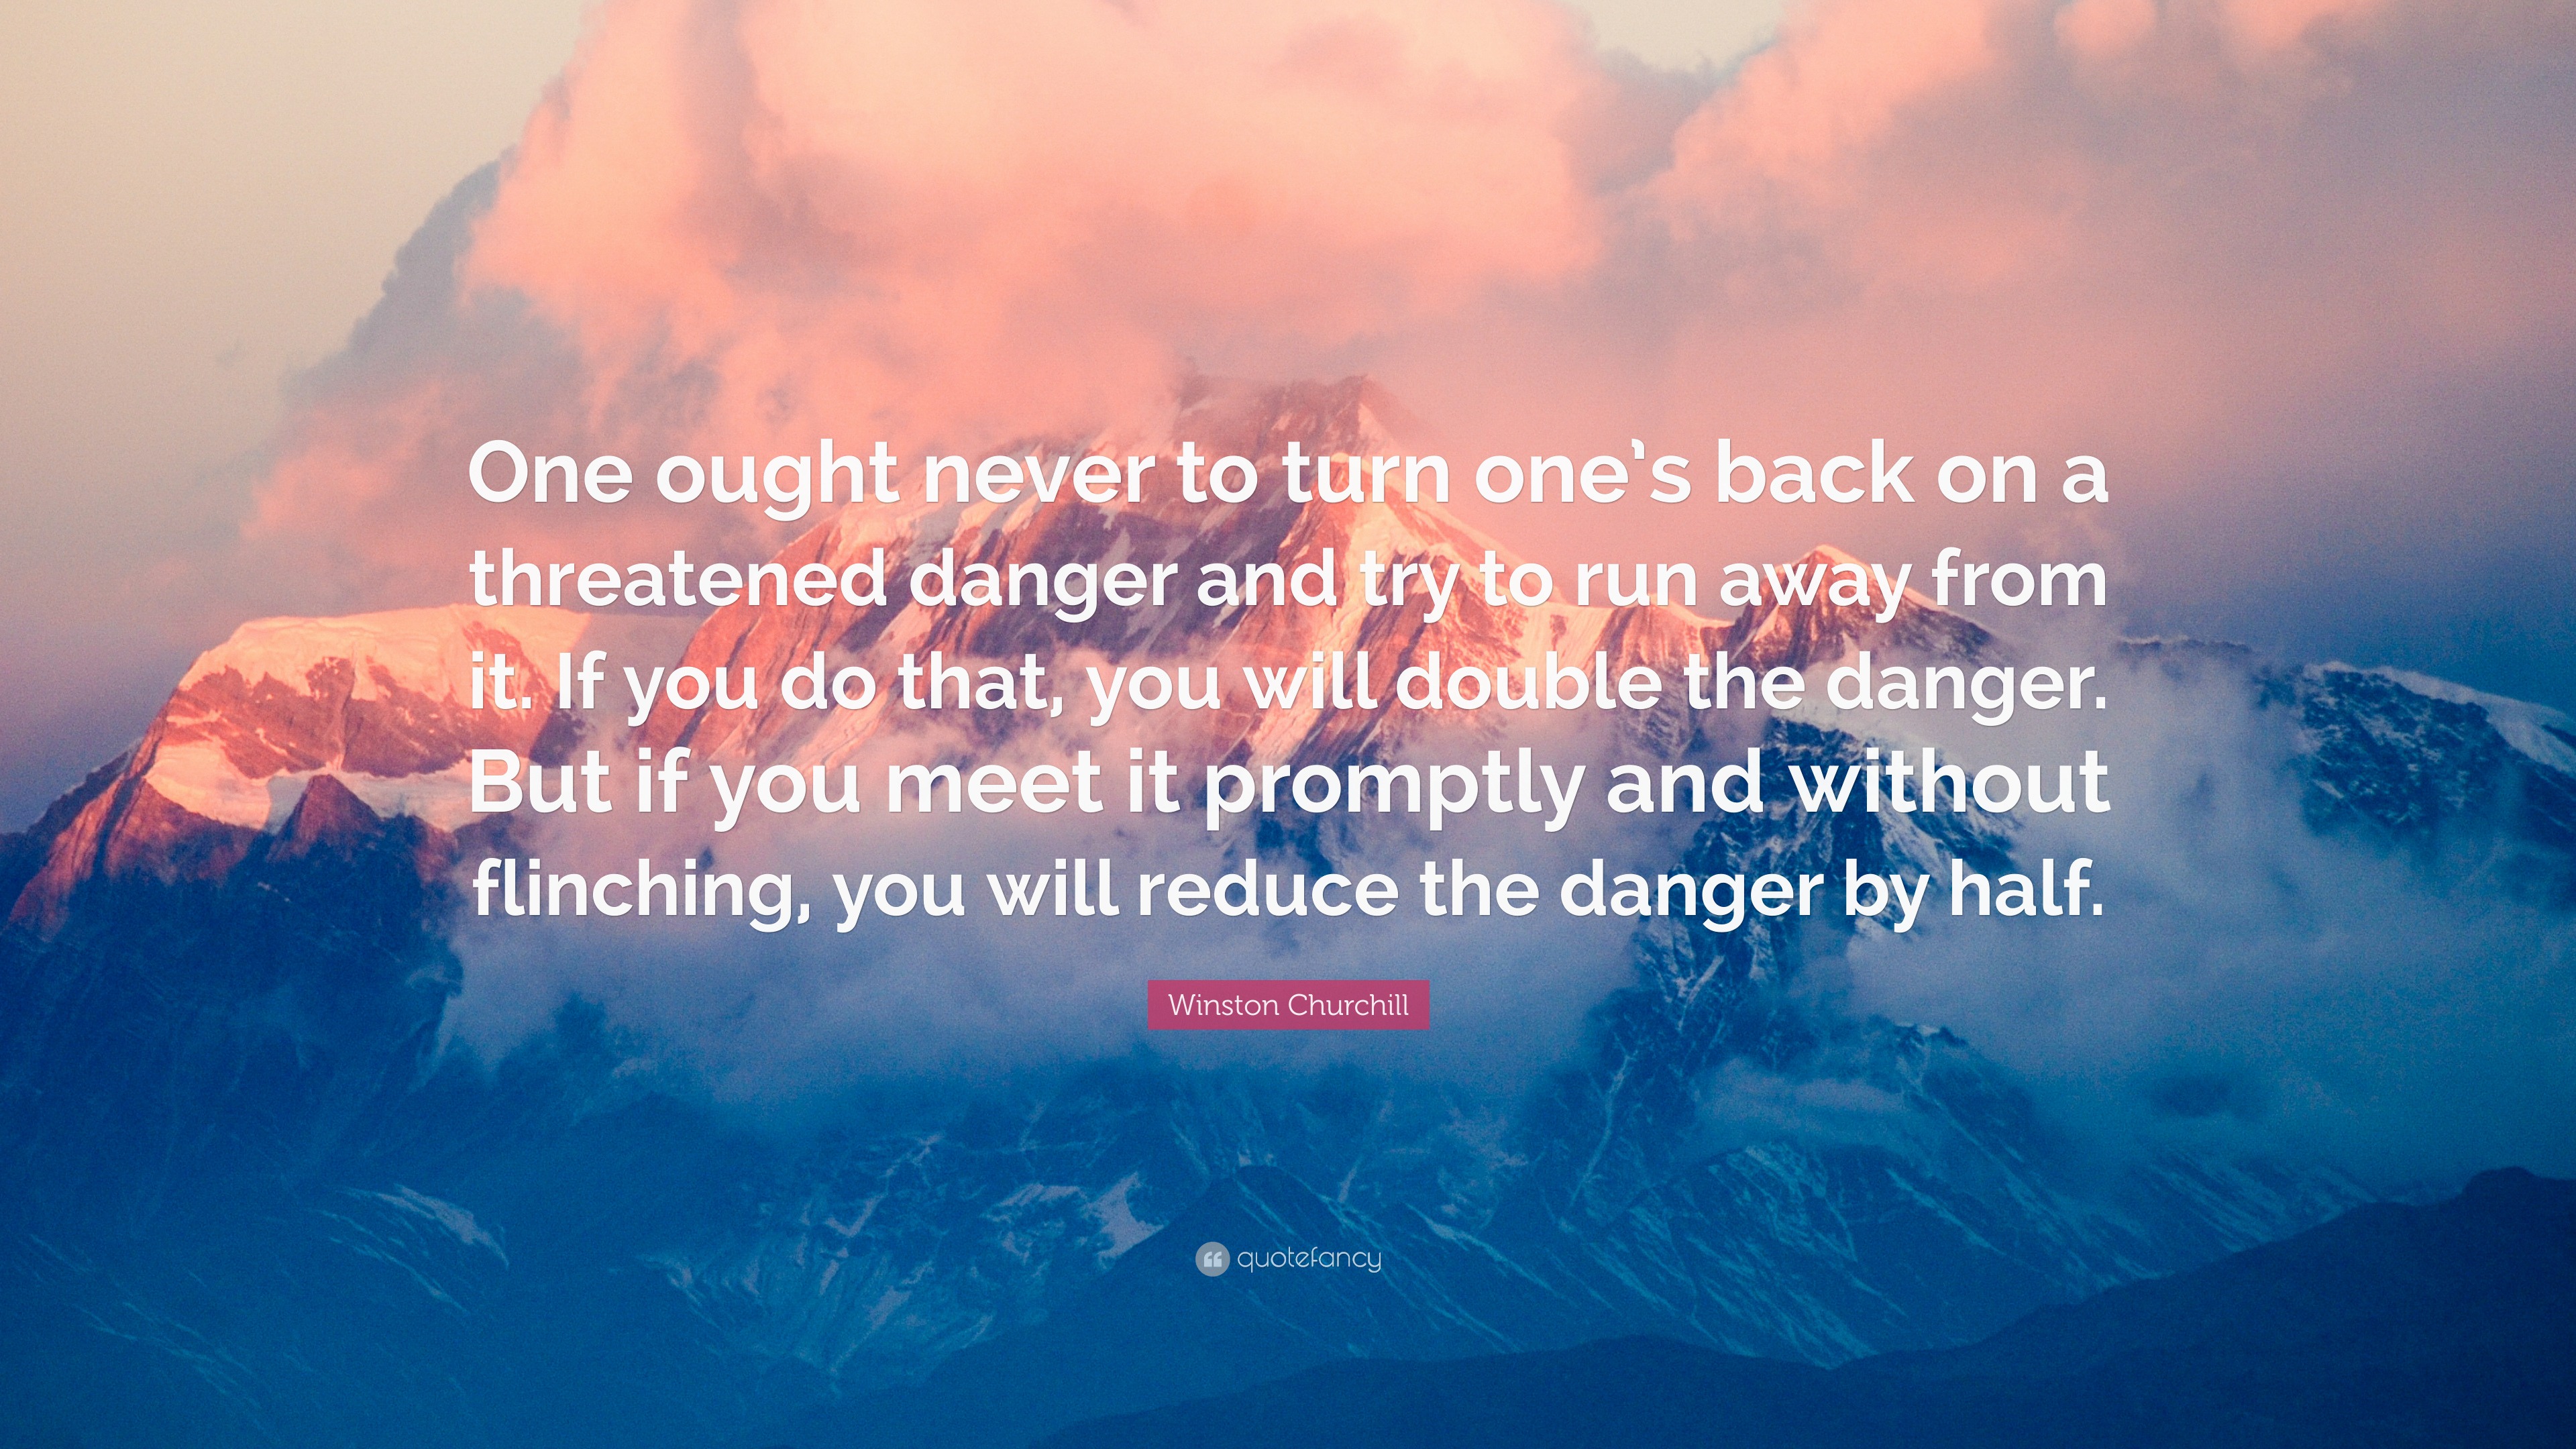 Winston Churchill Quote: “One ought never to turn one’s back on a ...